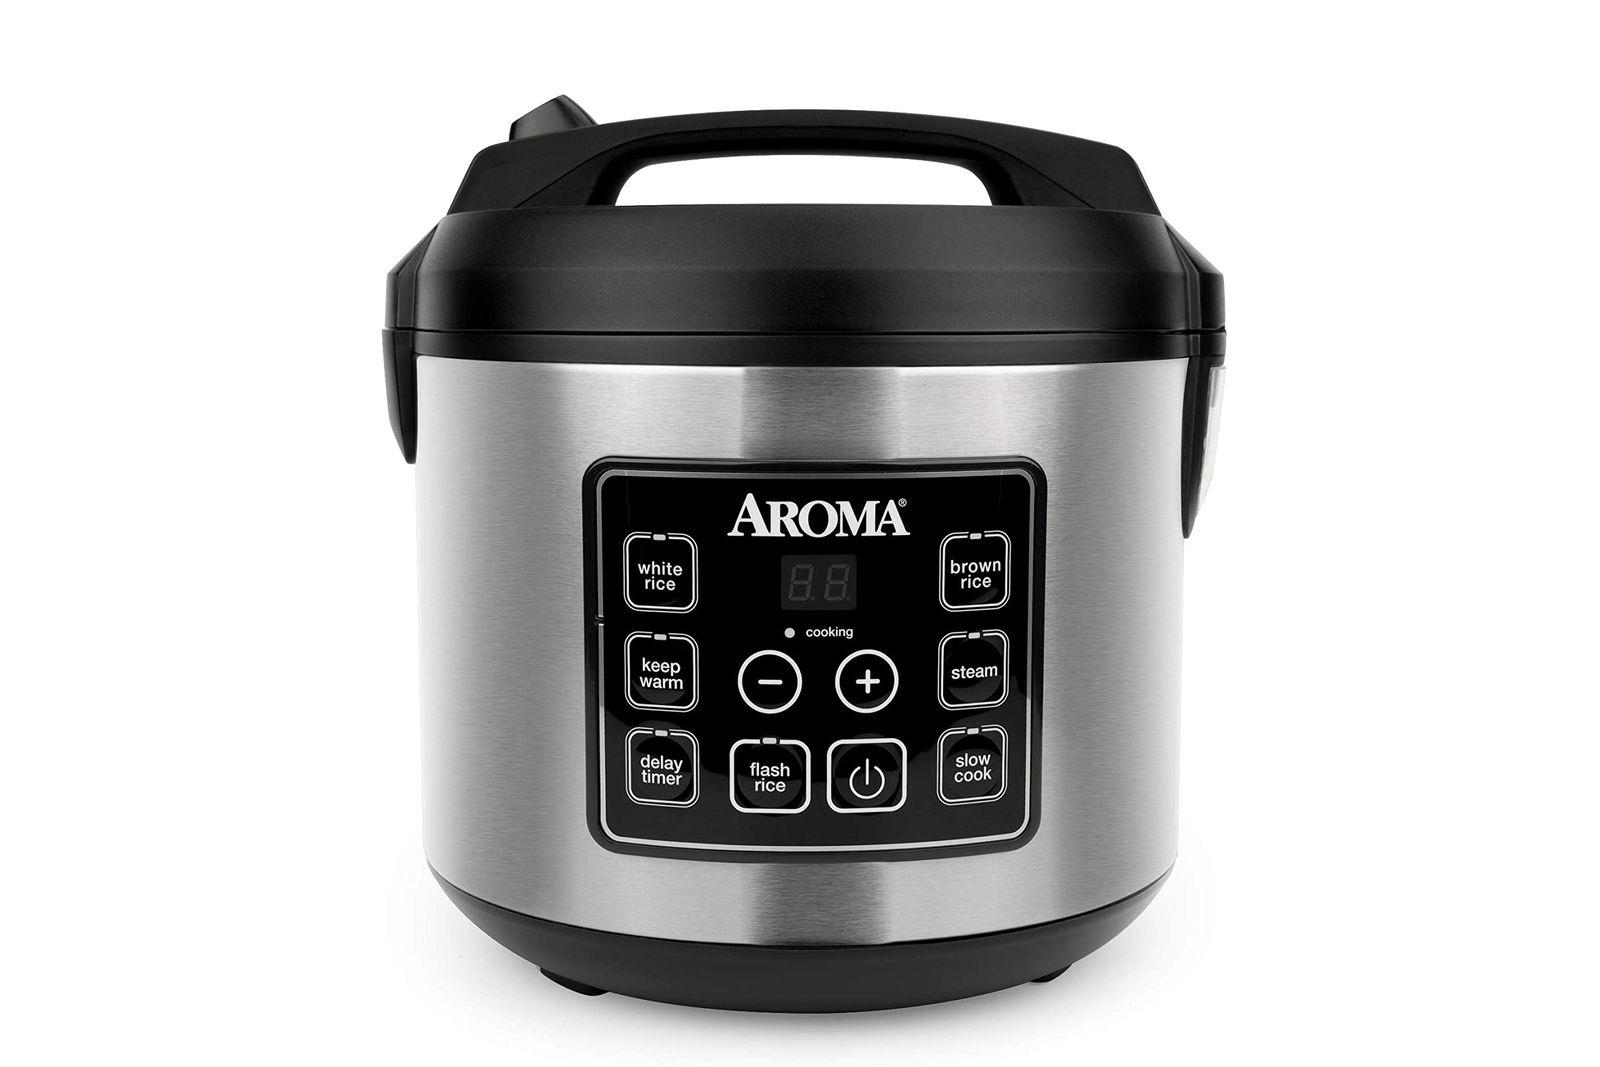 https://static1.pocketlintimages.com/wordpress/wp-content/uploads/154949-smart-home-news-buyer-s-guide-best-rice-cookers-get-fluffy-rice-the-easy-way-with-these-dedicated-kitchen-appliances-image2-f0l8hvmkse.jpg